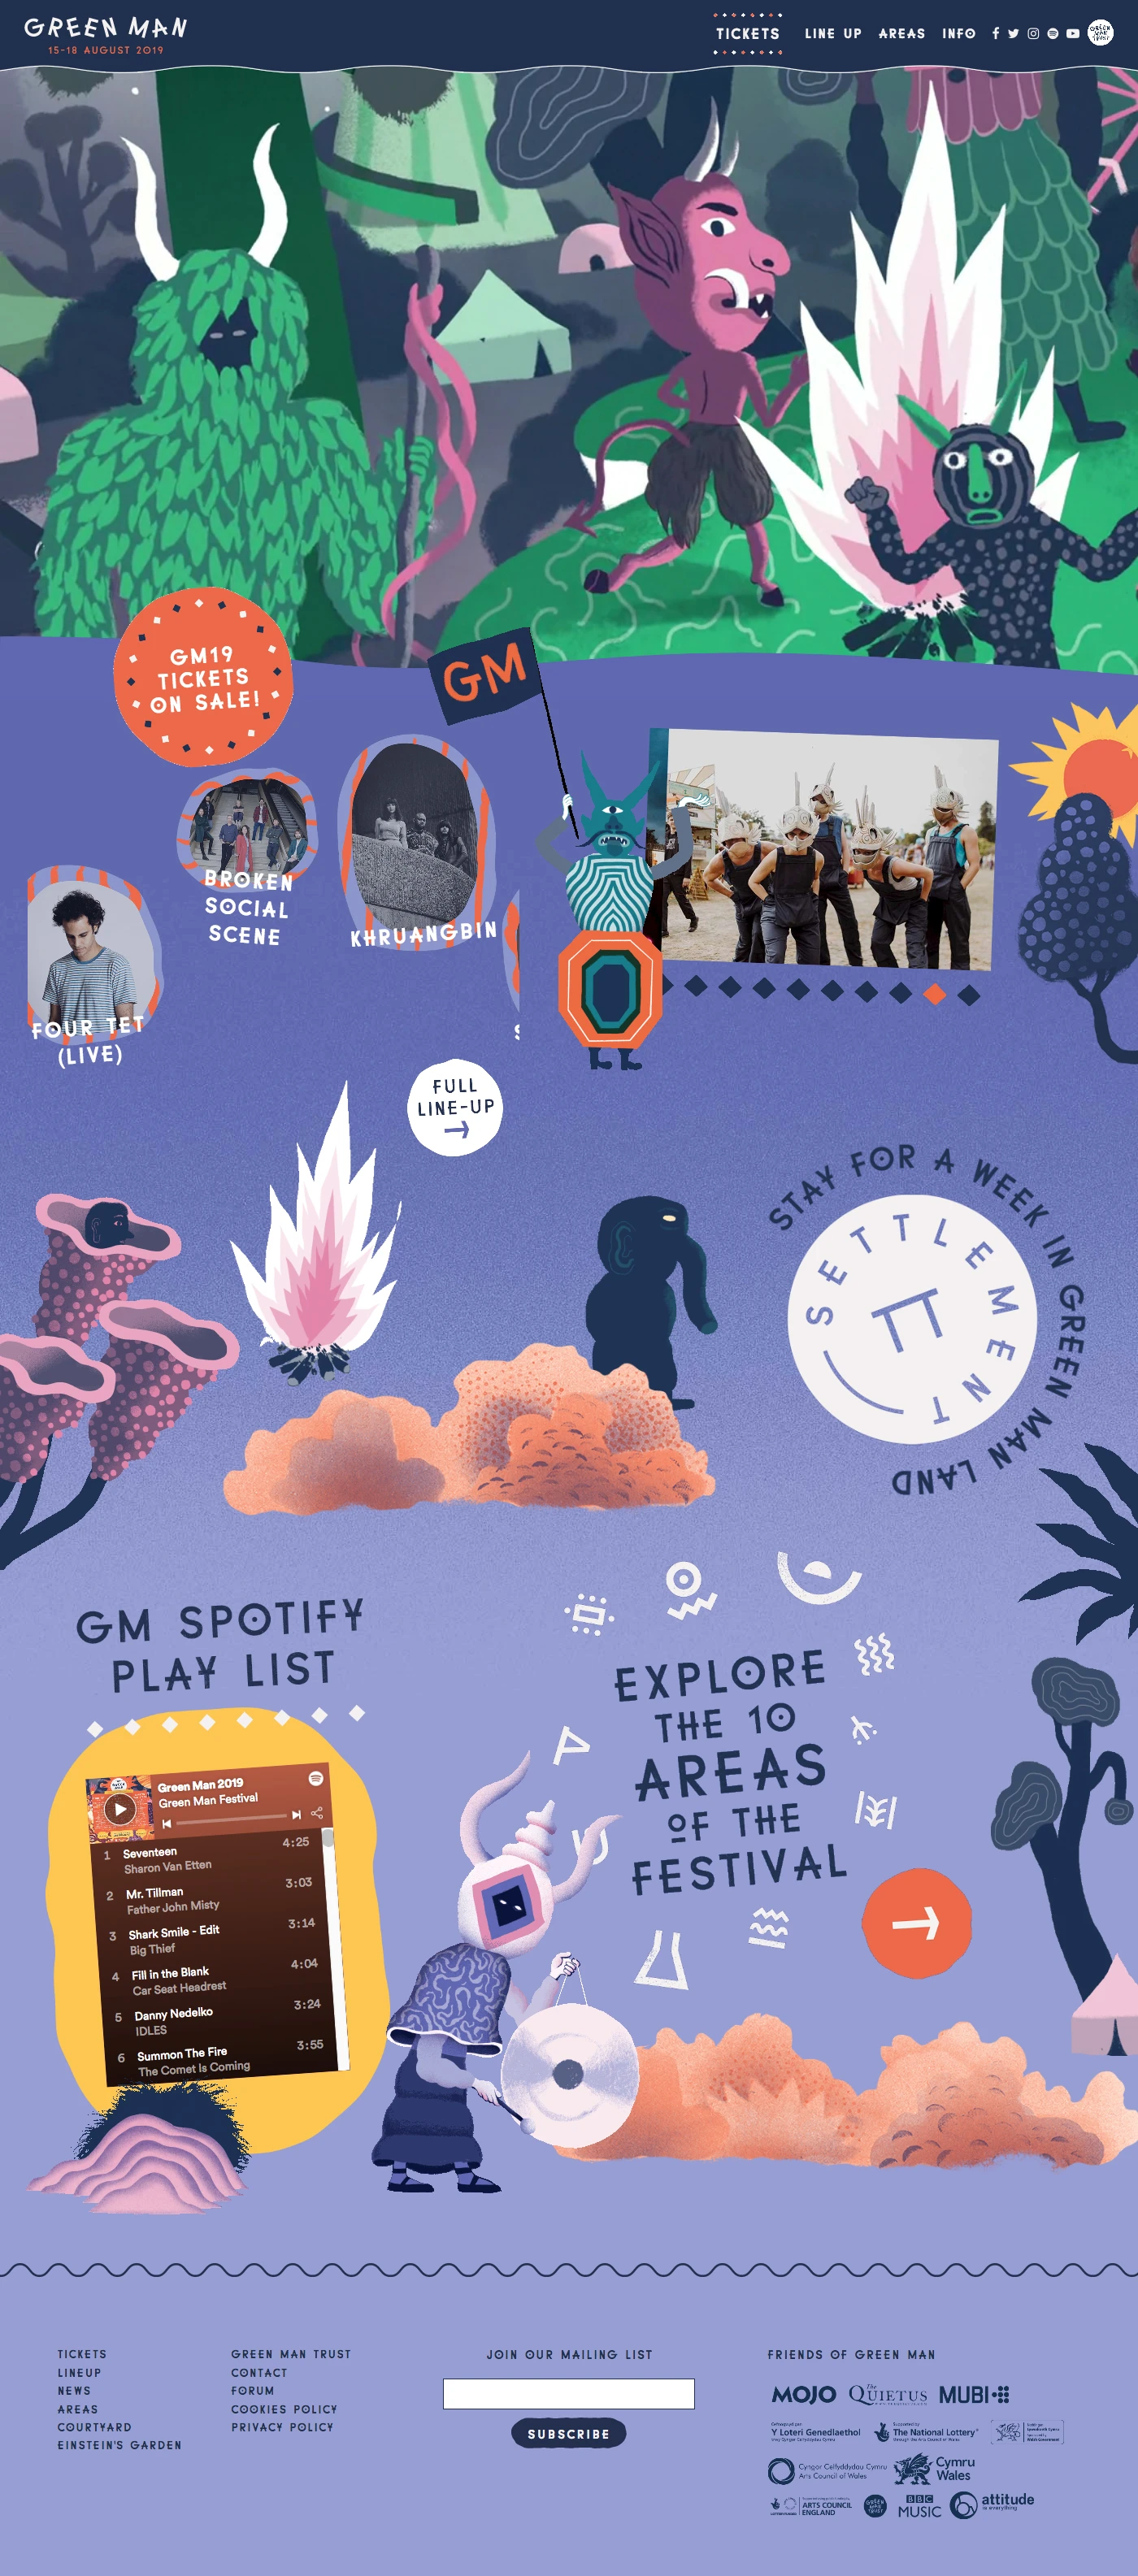 Green Man Festival Landing Page Example: 15-18 August 2019. Ten Areas of Music, Comedy, Literature, Cinema, Welsh Beer, Science, Art. The friendliest festival in the universe.